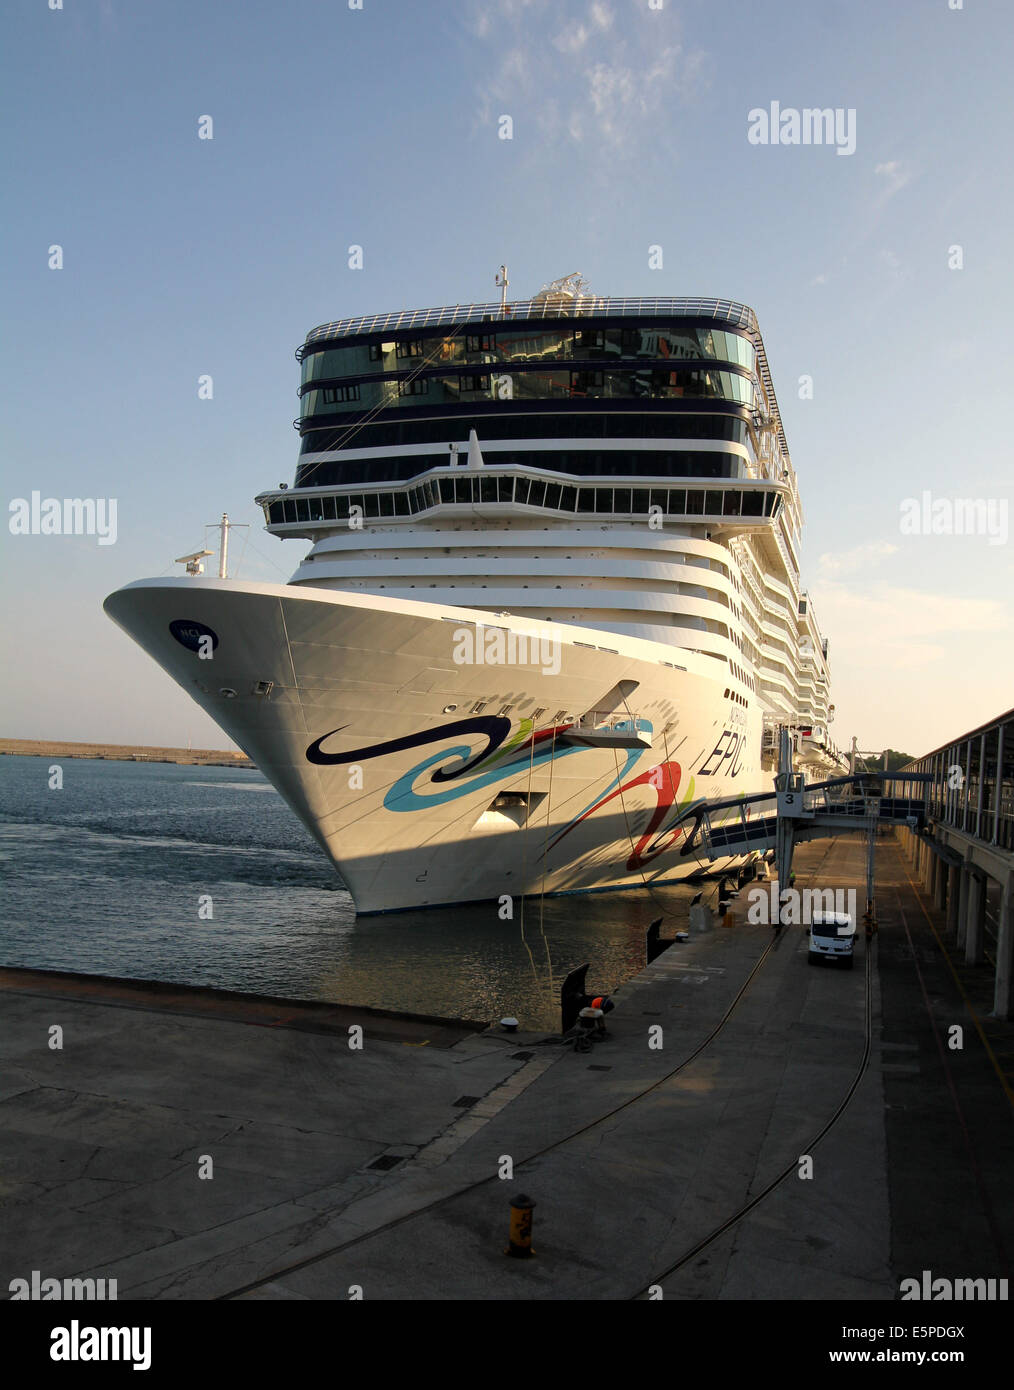 Norwegian Cruise Line (NCL) Cruise ship “Norwegian Epic” (325 mtrs) - casting off mooring lines during early evening departure Stock Photo